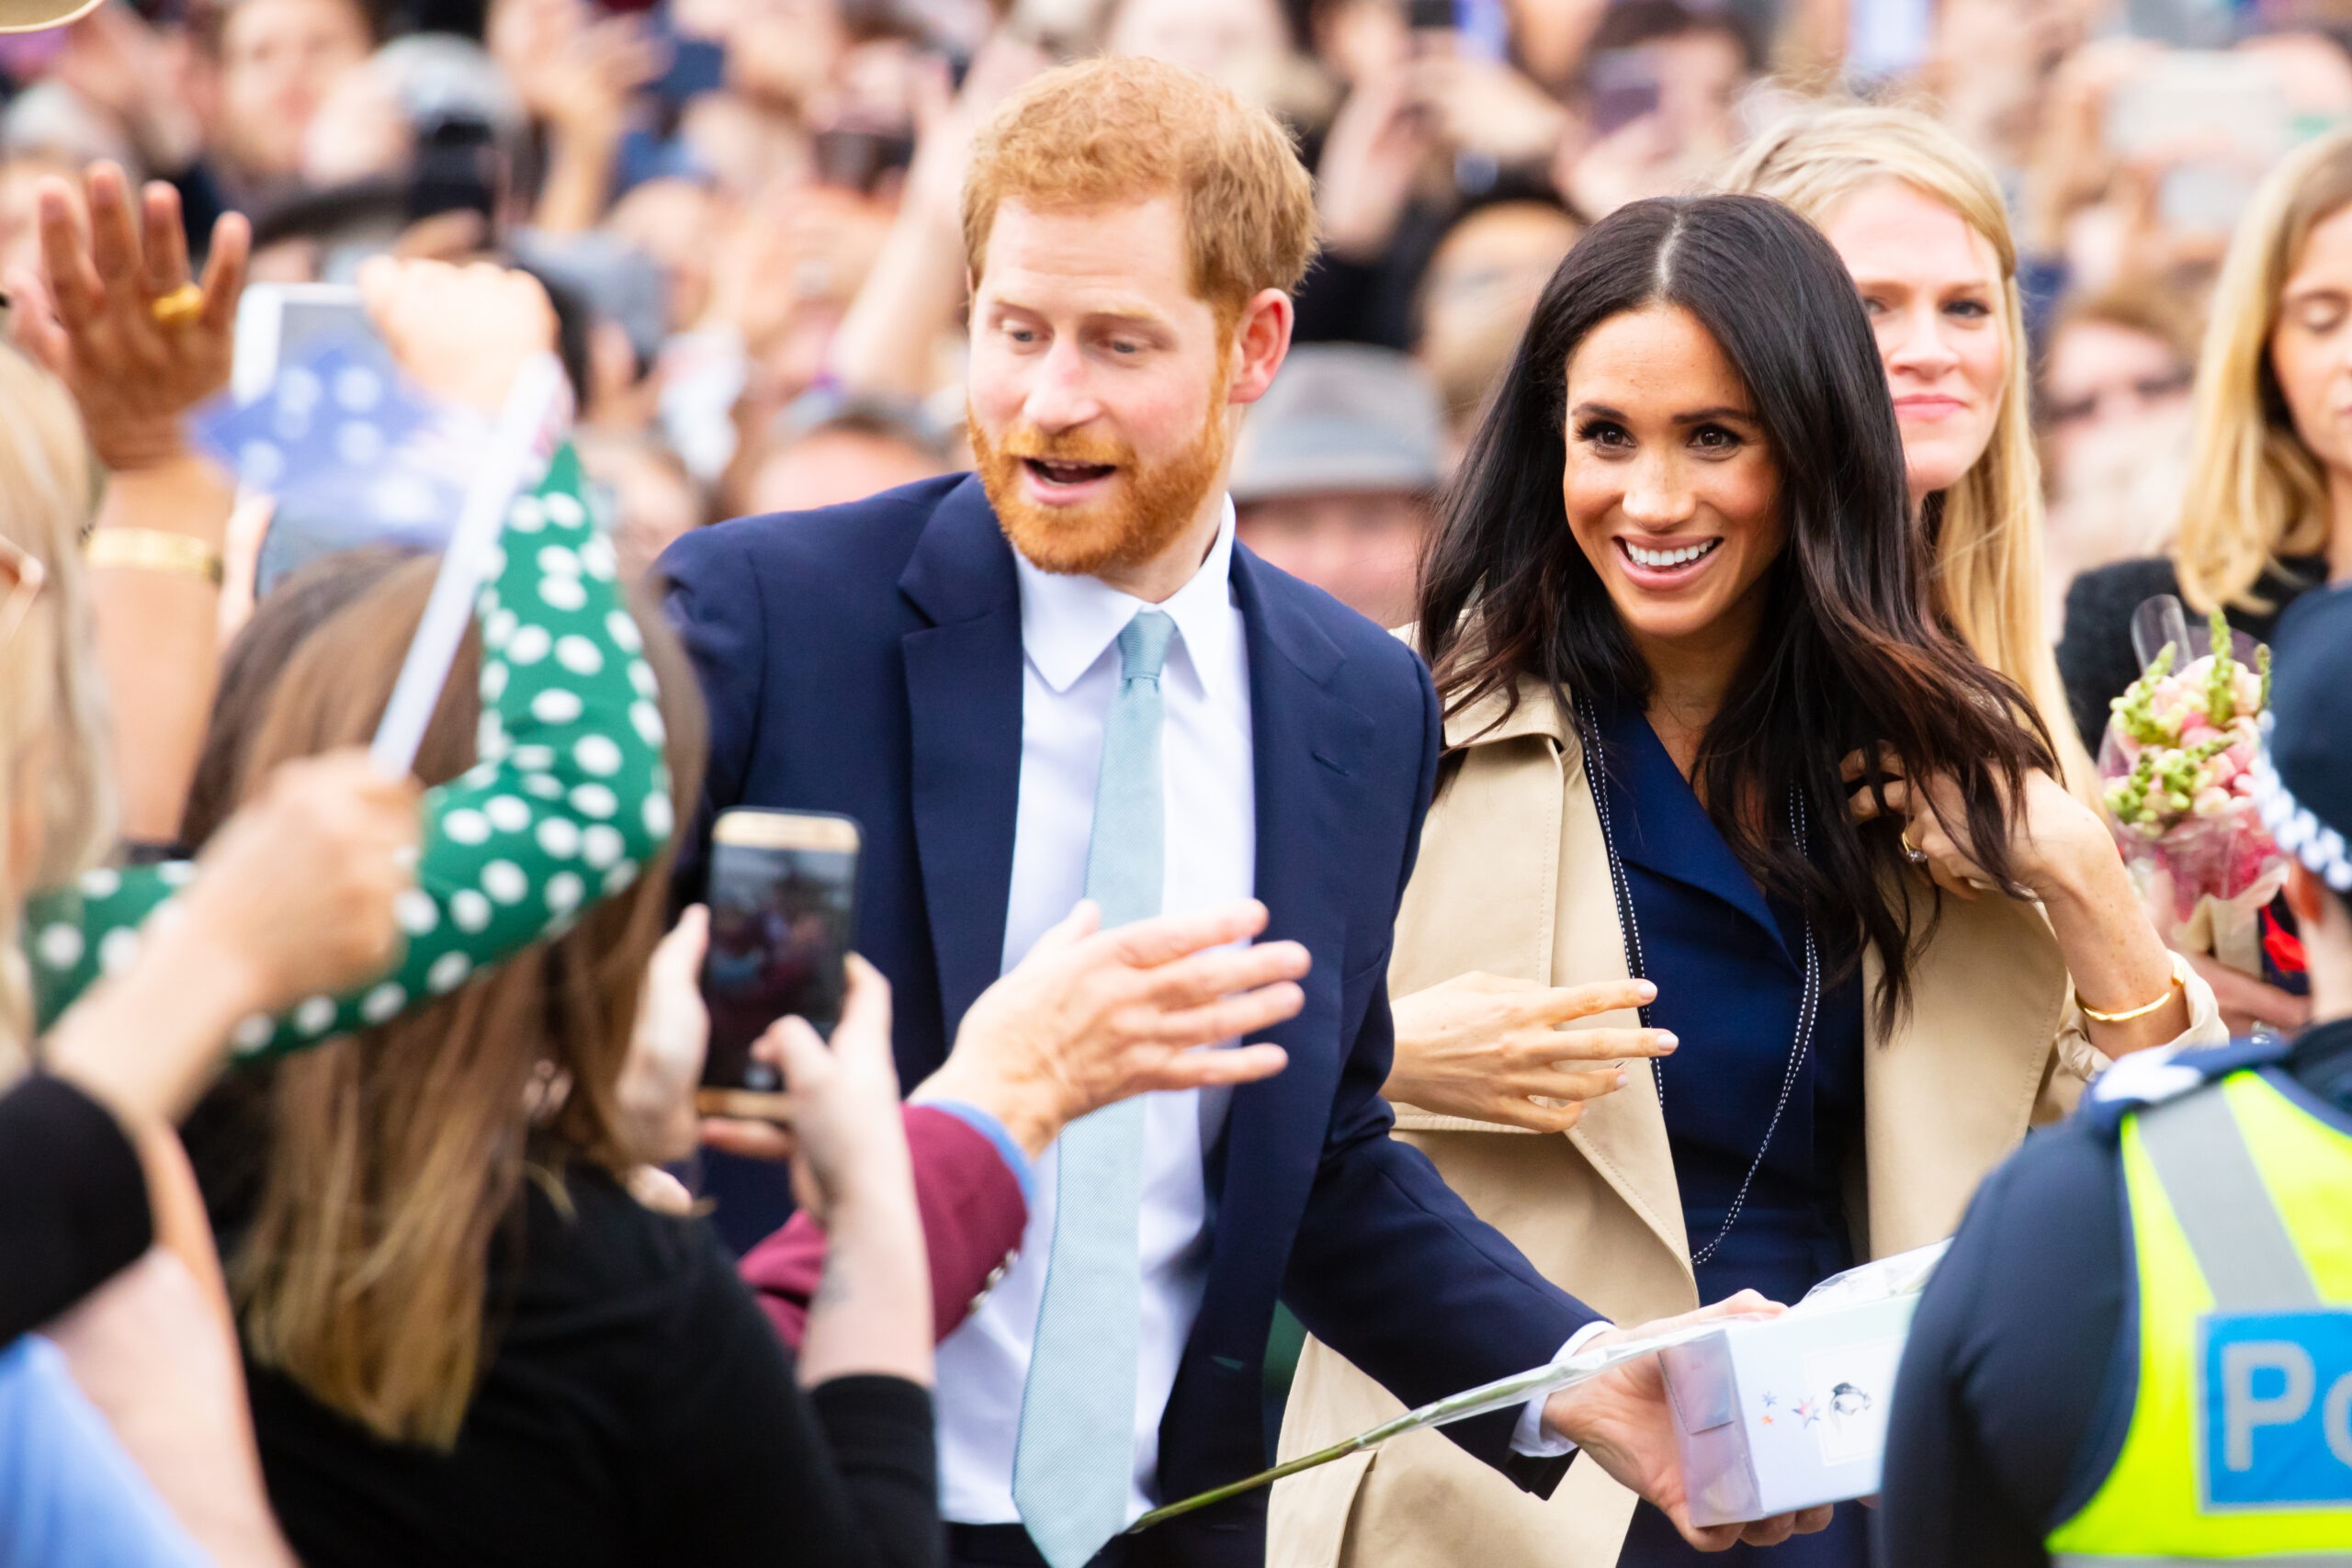 Prince Harry And Meghan Markle Just Signed A $100 Million Deal With Netflix